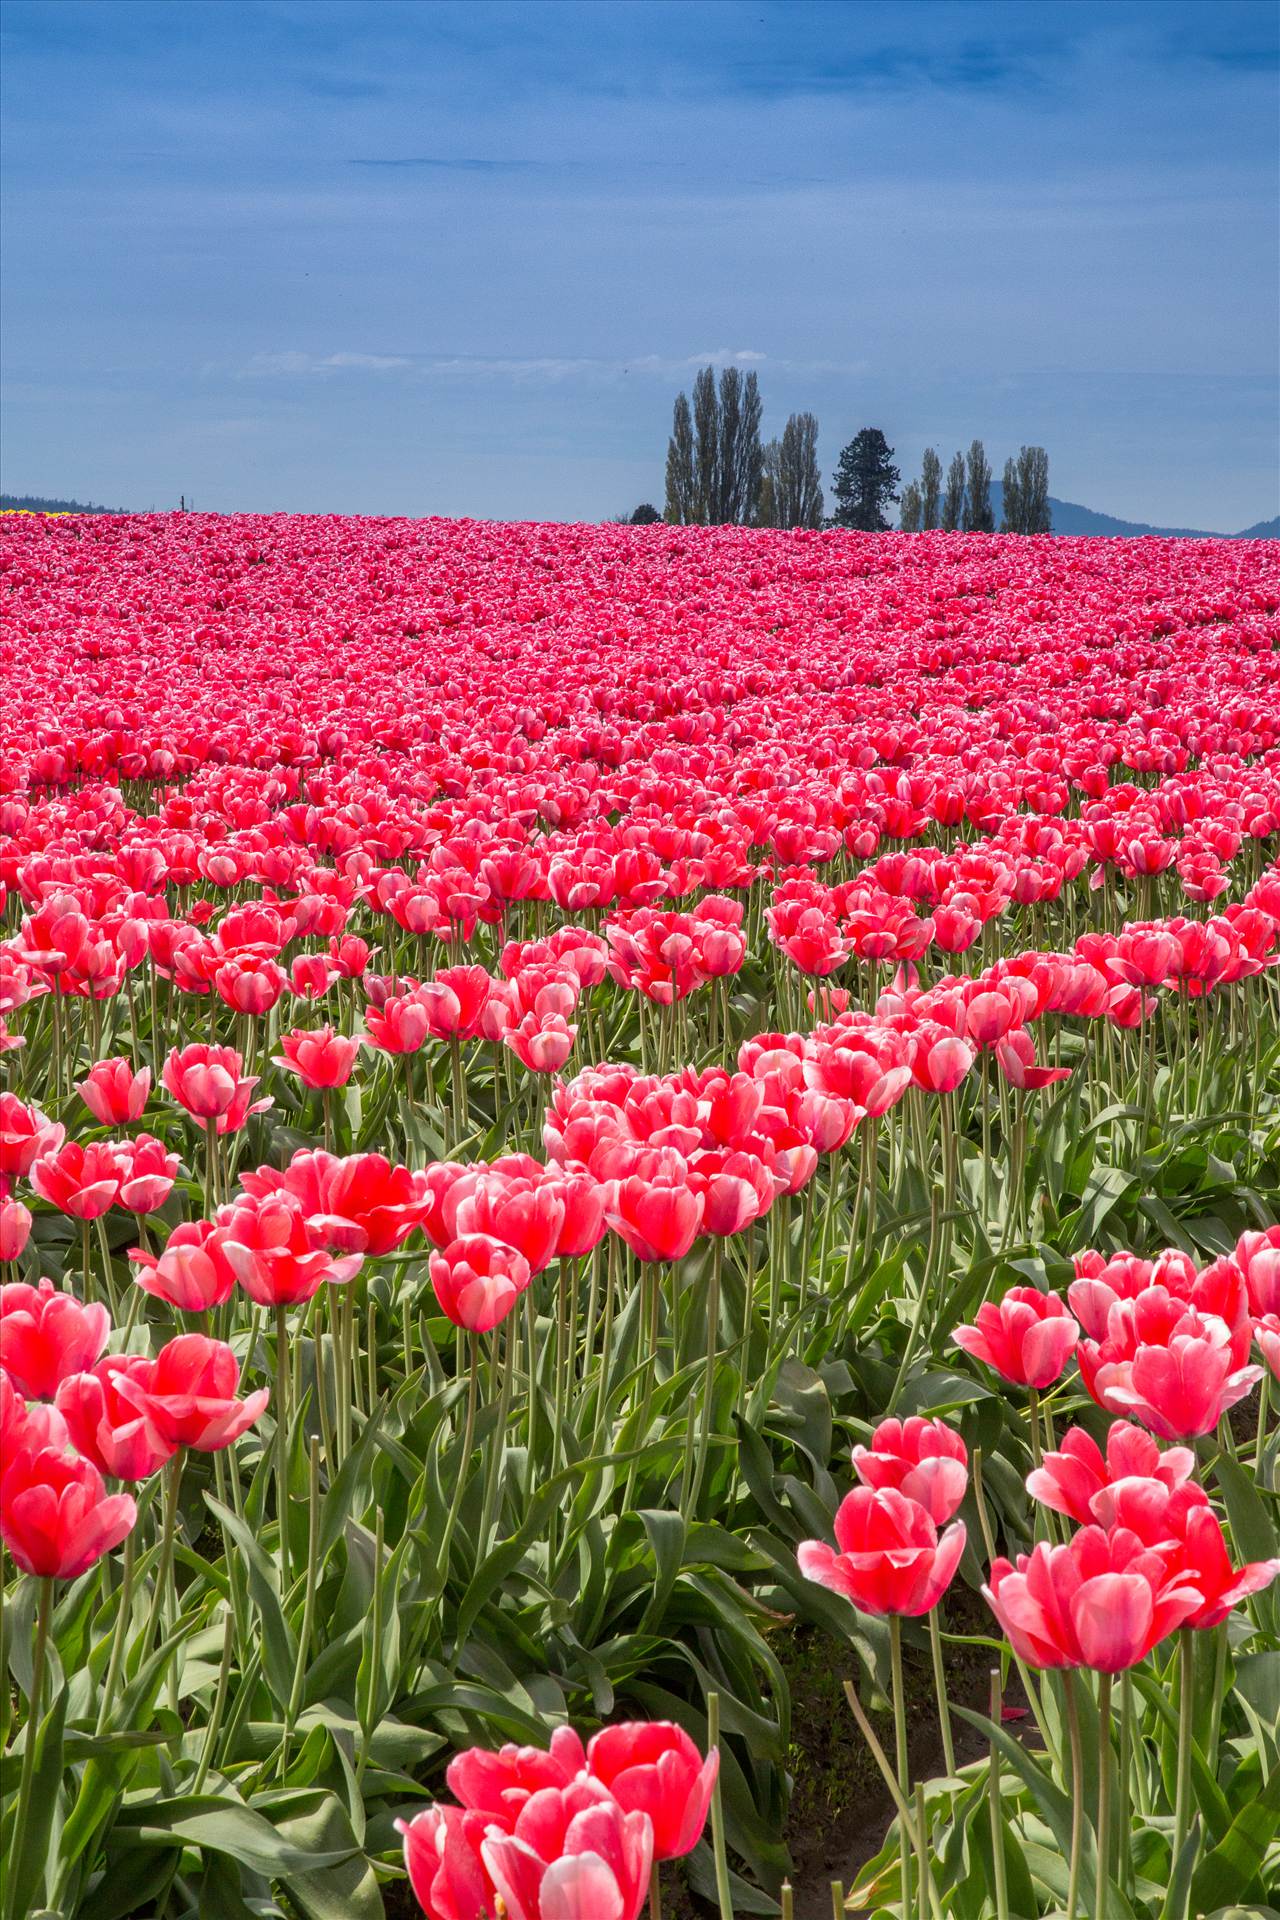 Tulips 3 - From the Skagit County Tulip Festival, 2012. by Scott Smith Photos